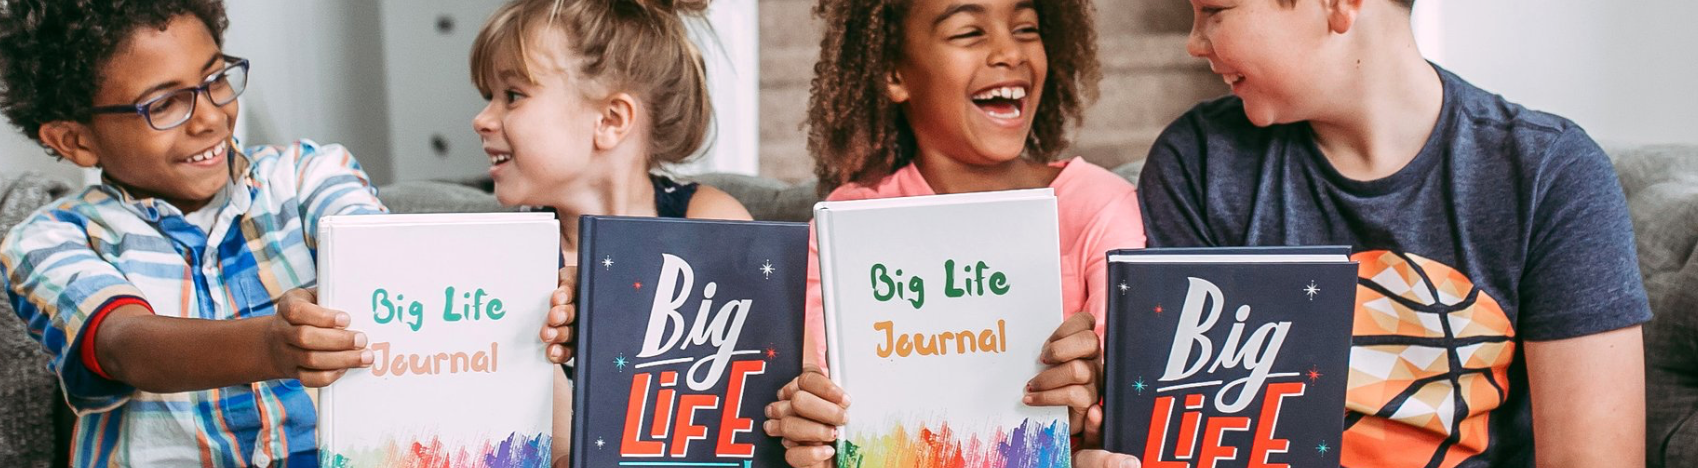 What is the Big Life Journal and why is it so cool?, by Zen Maldonado